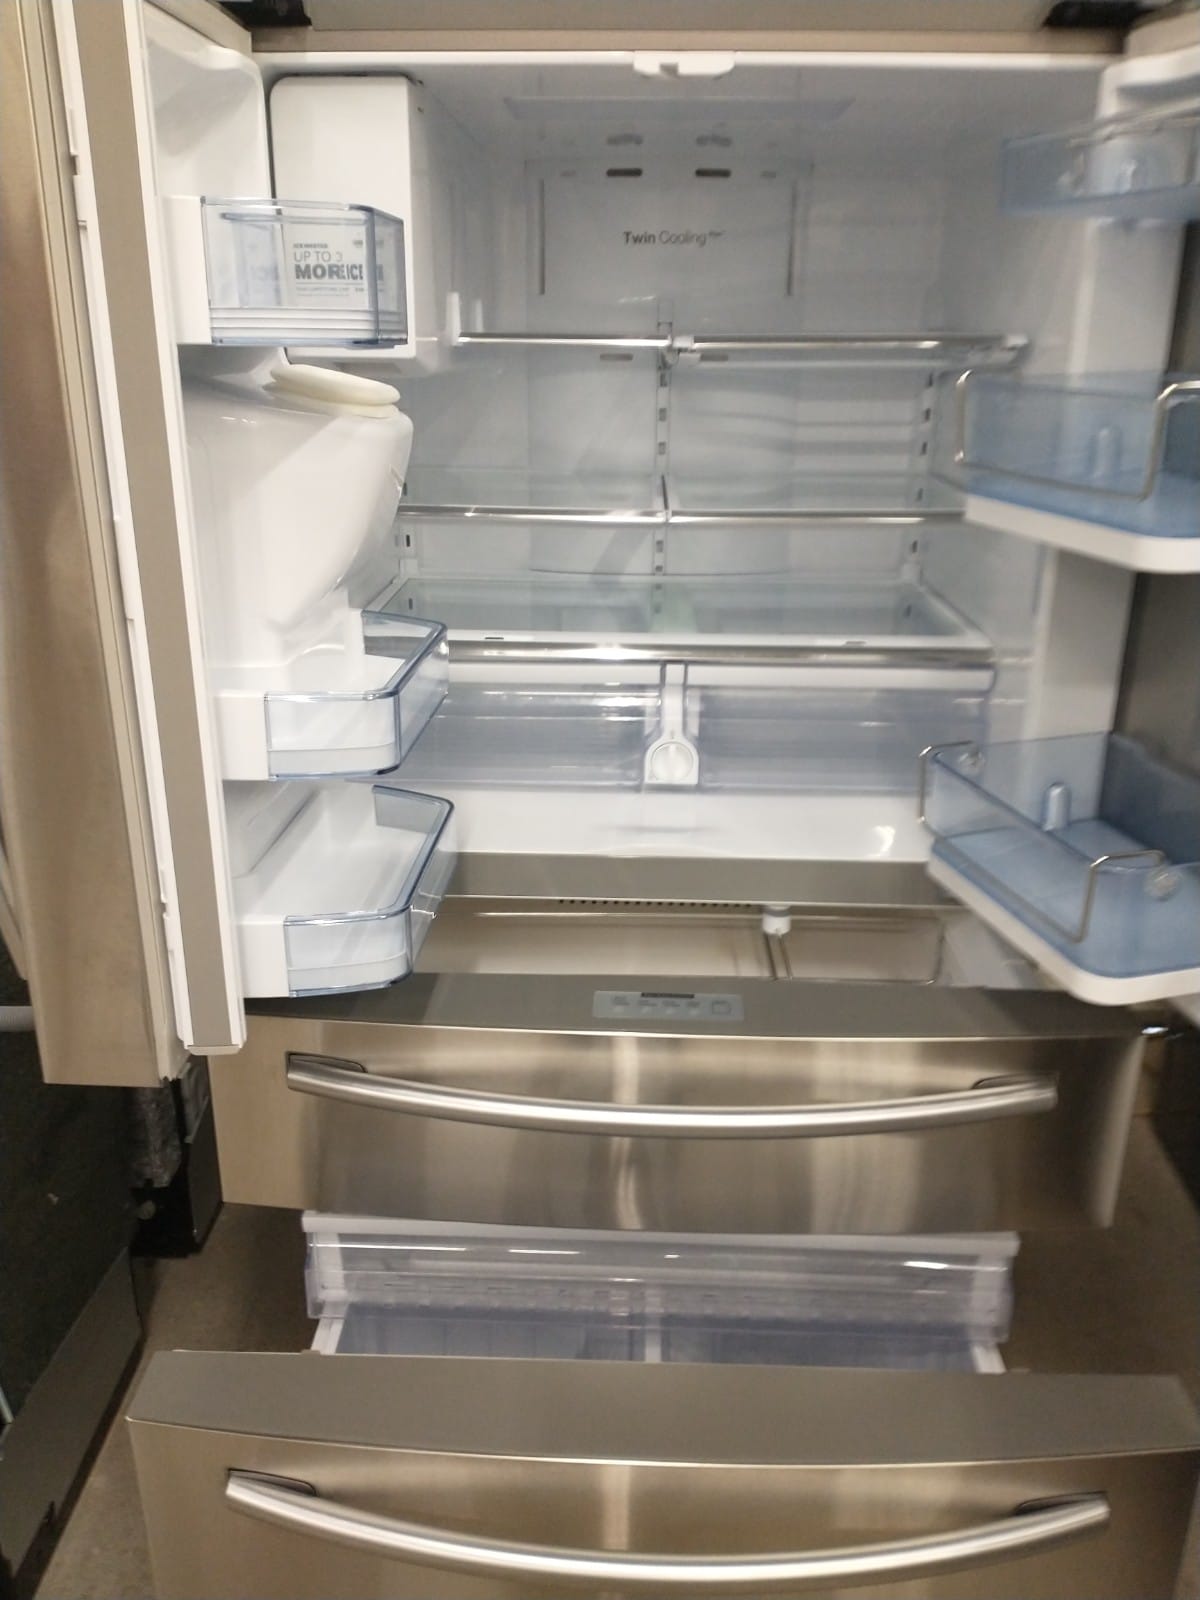 Order Your Used Refrigerator Samsung Rf30hbedbsr Today!